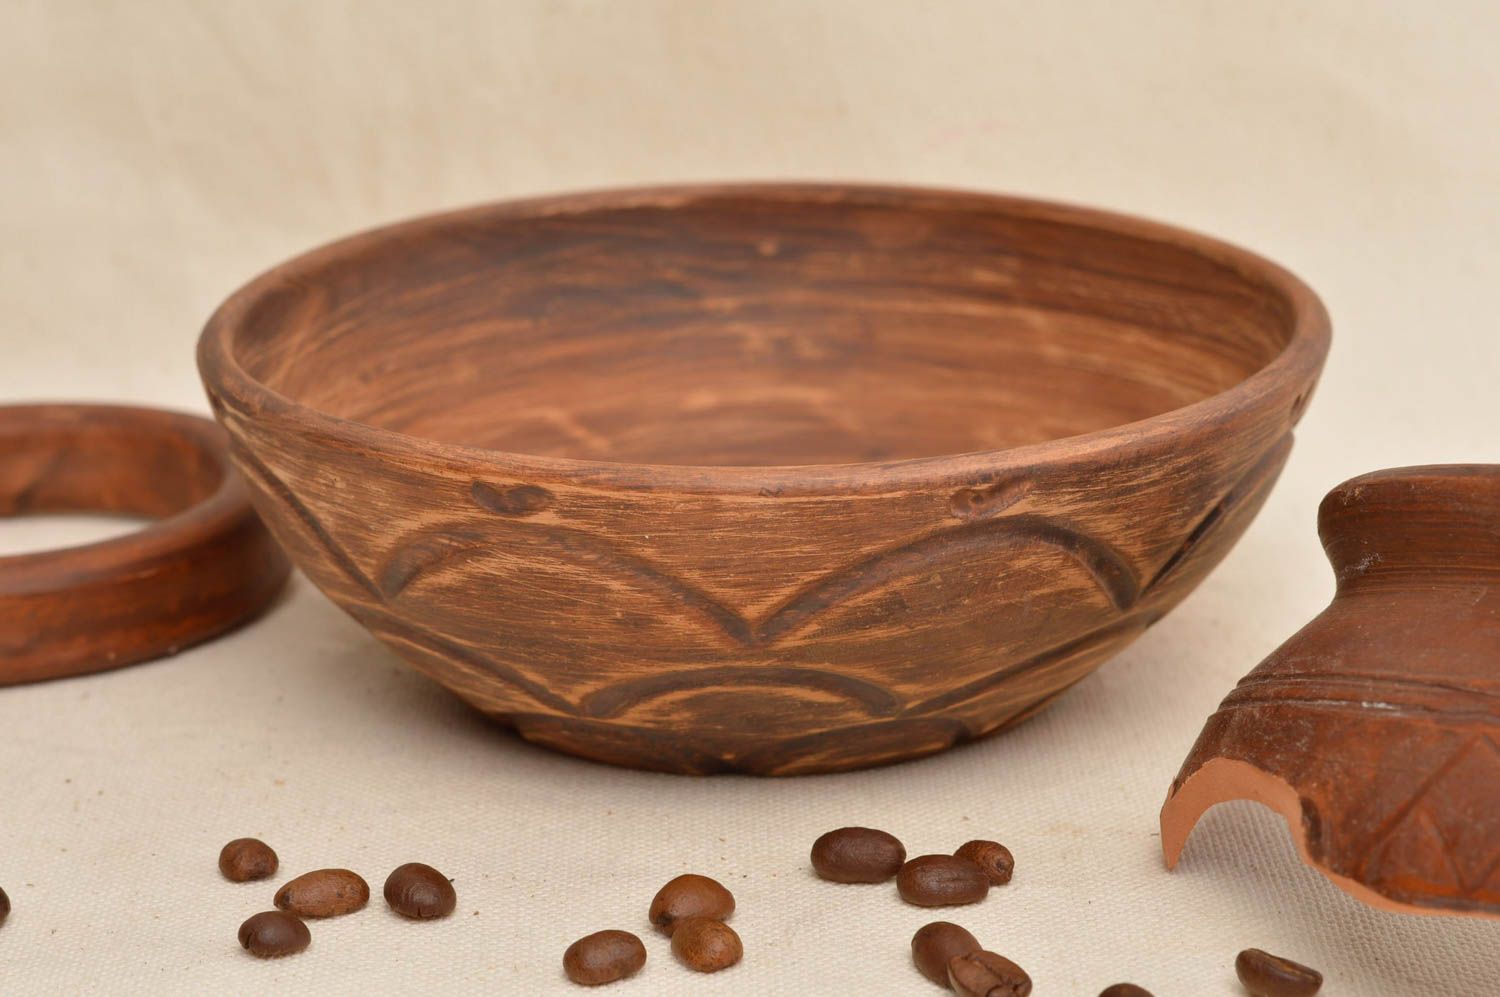 5,5 handmade terracotta cereal bowl great natural pottery 0,4 lb photo 1